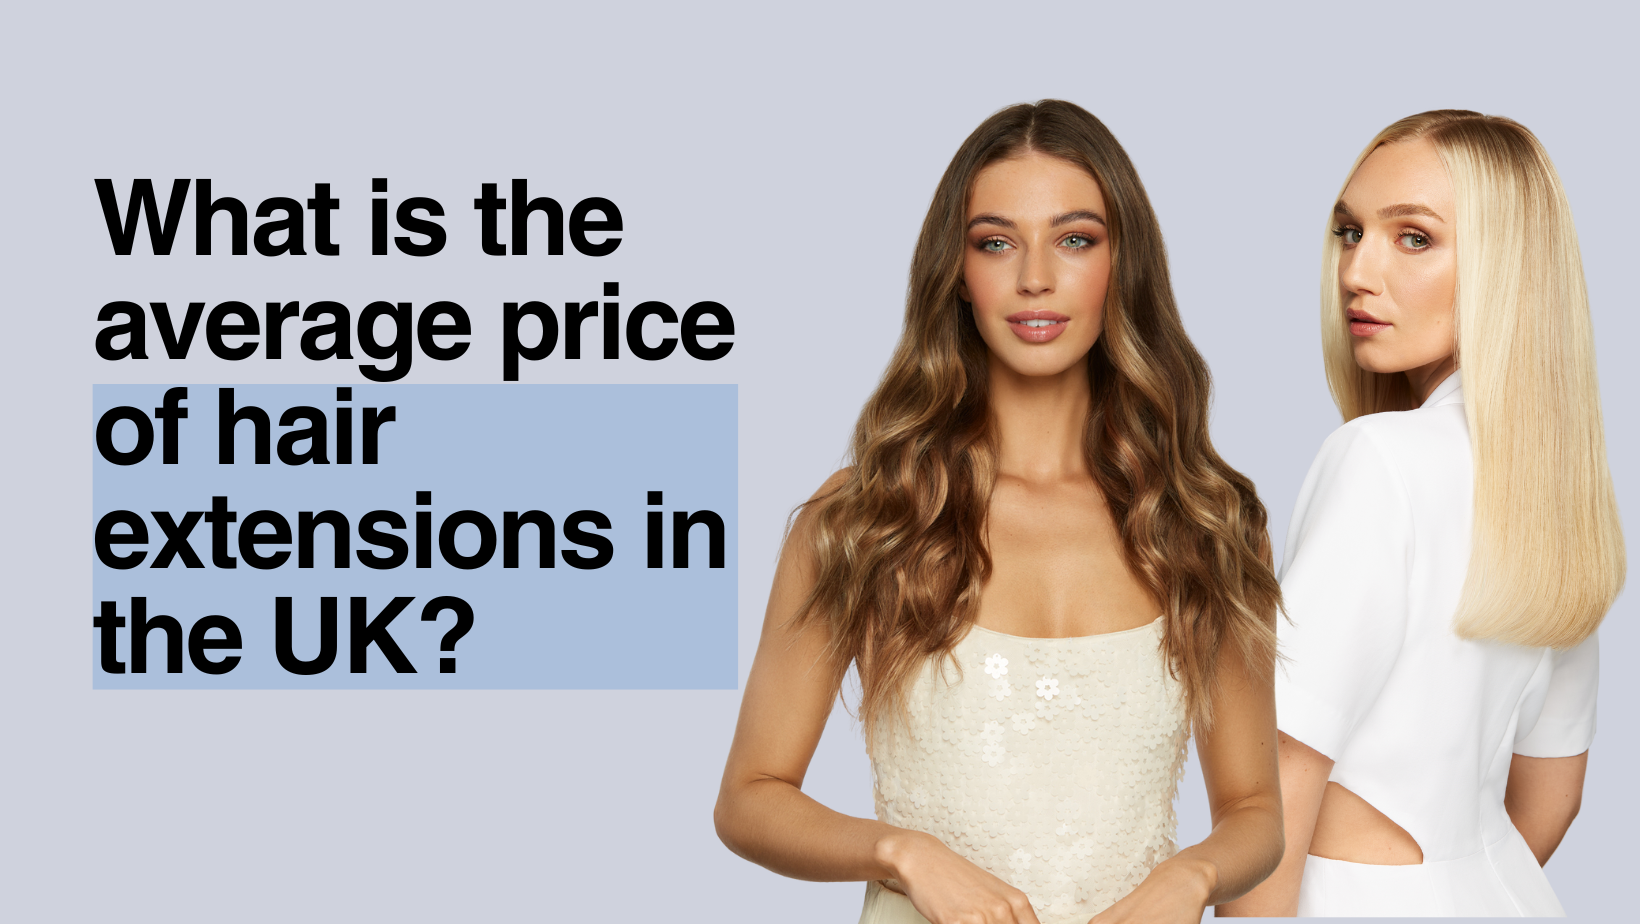 What is the average price of hair extensions in the UK?